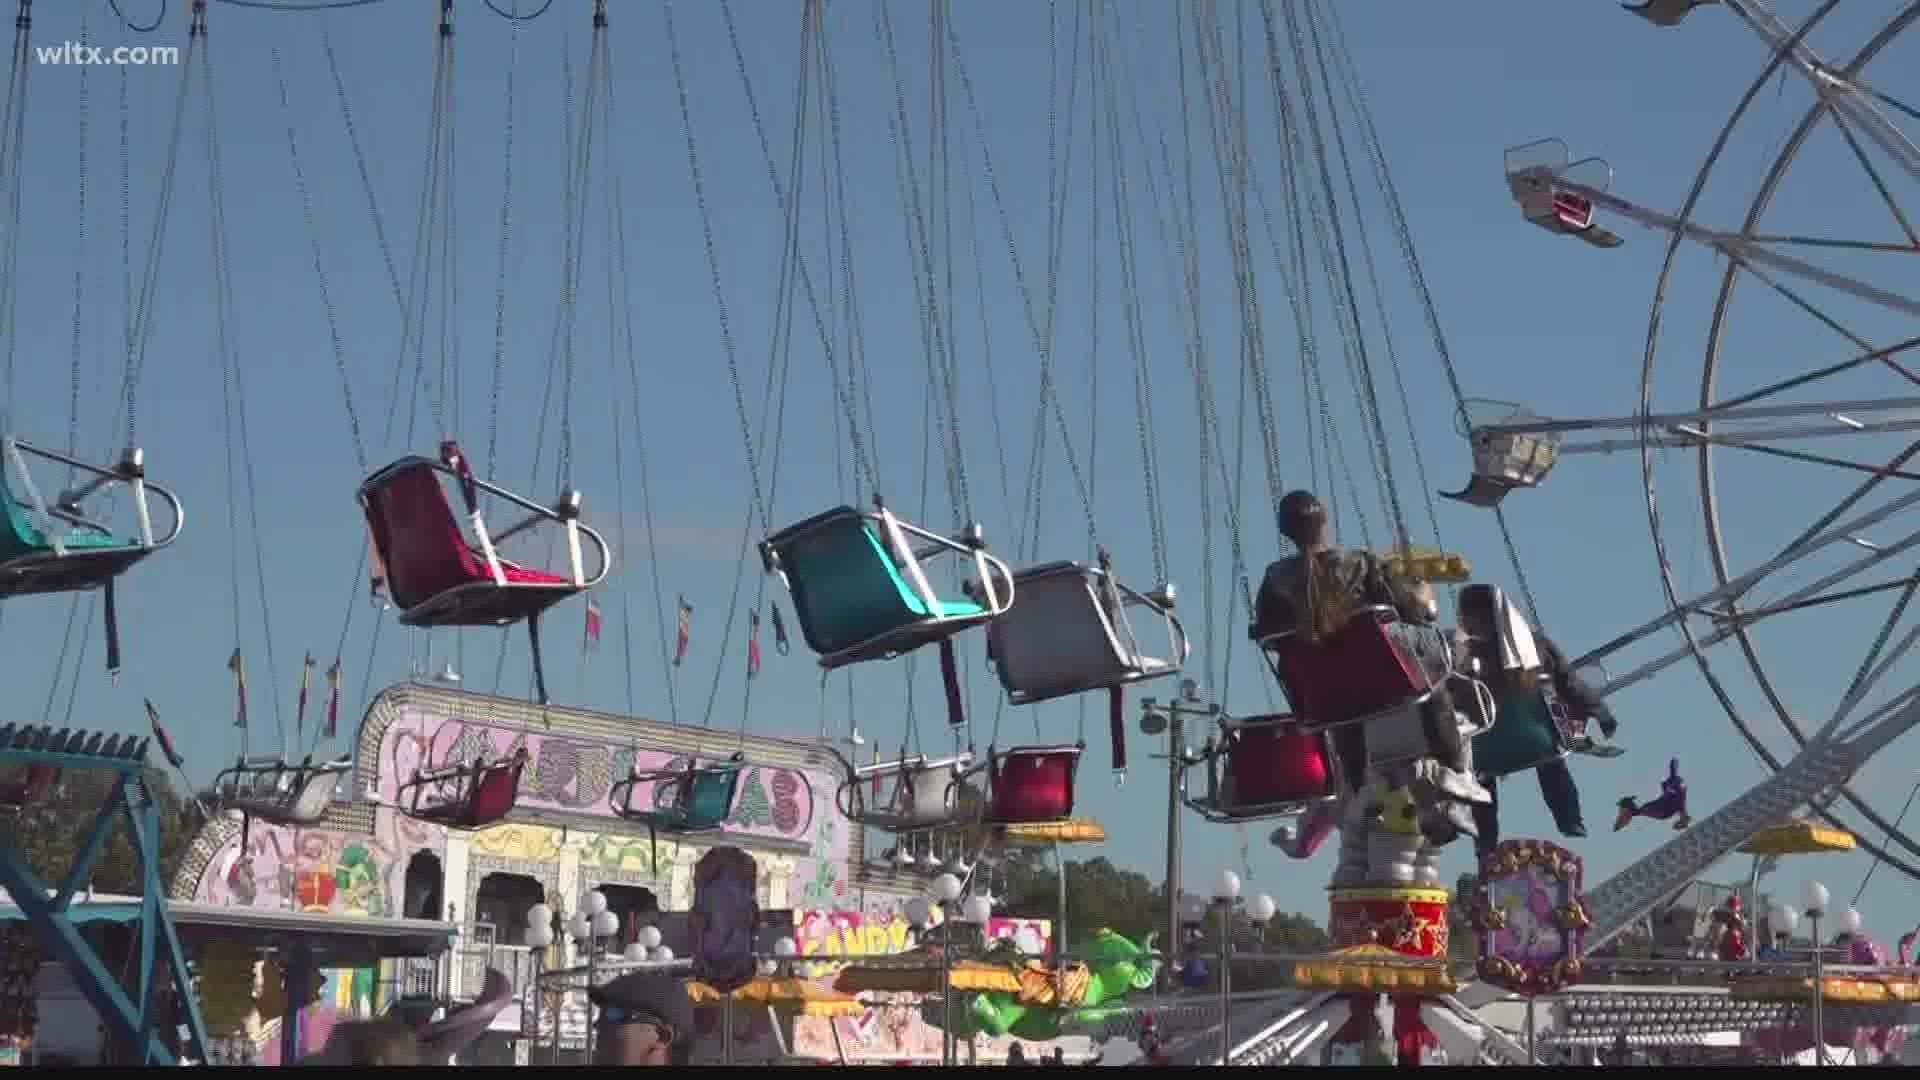 Its the Sumter County American Legion fair and about 25,000 people come to the six day event.